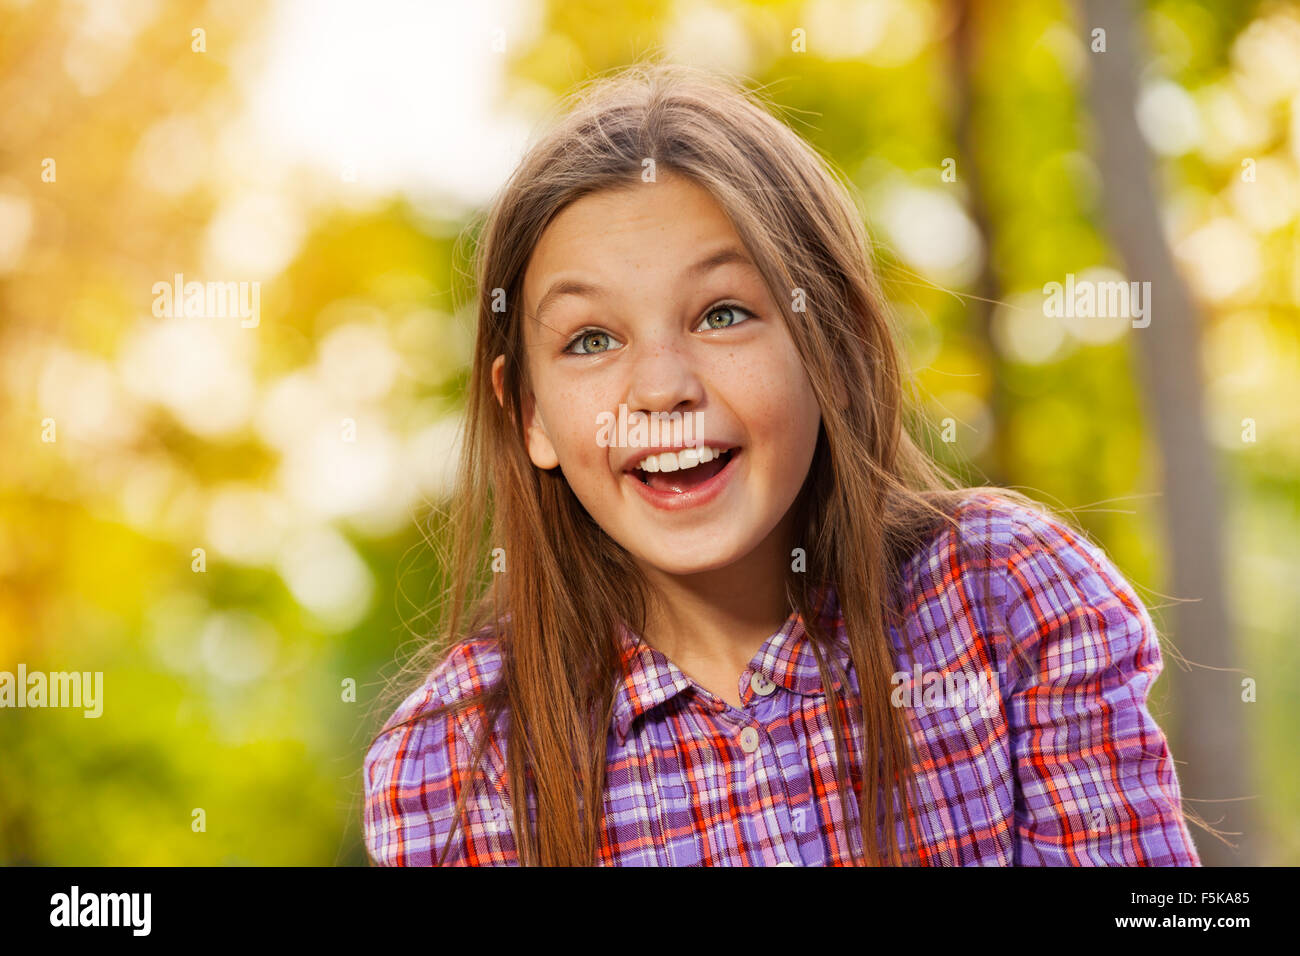 Little laughing girl portrait in autumn park Stock Photo